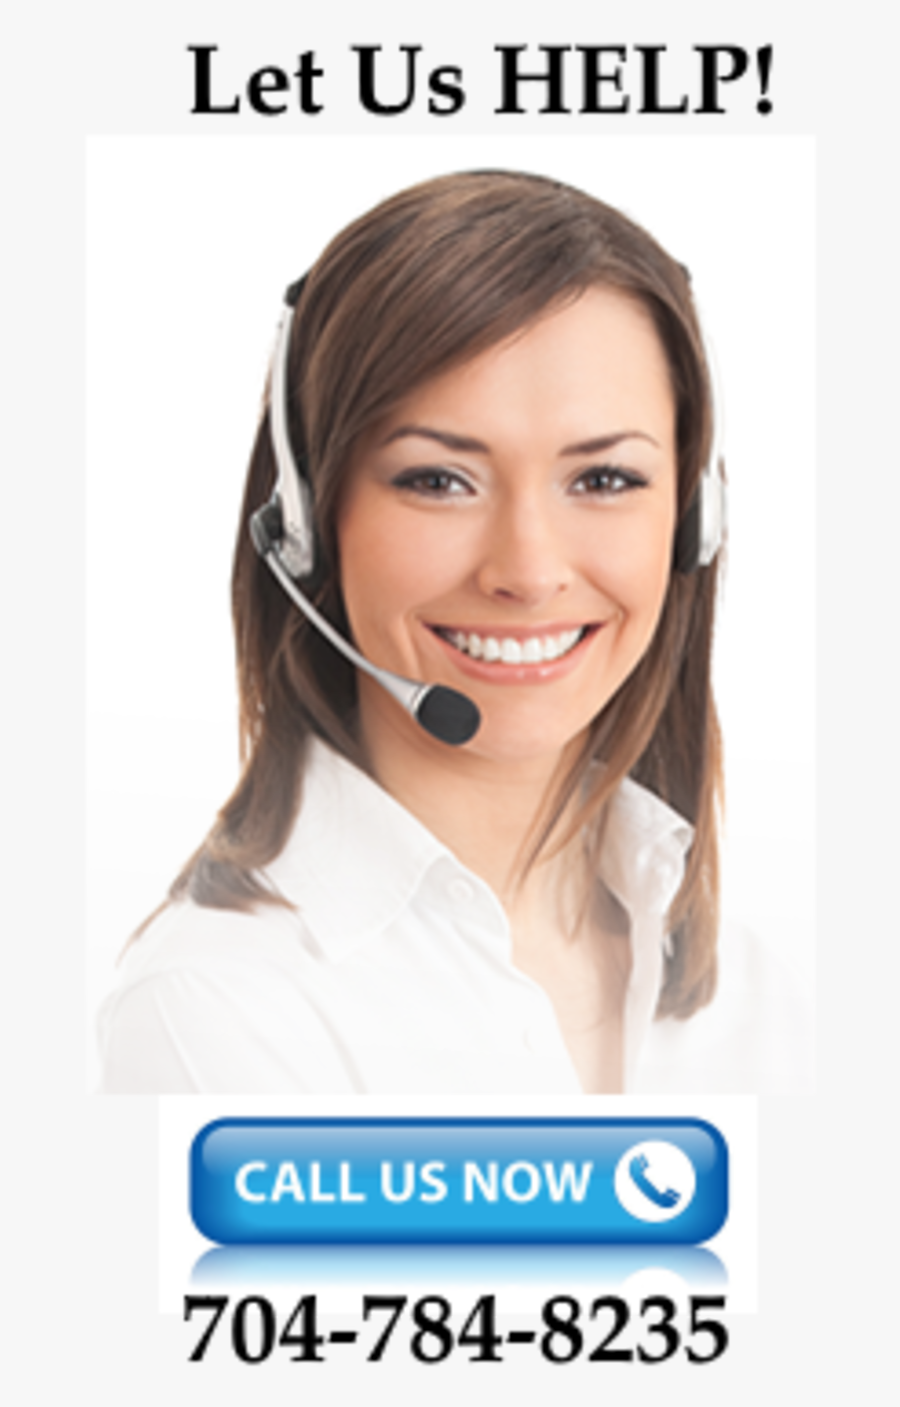 Carpet Cleaner Concord Nc - Live Chat Support Women, Transparent Clipart